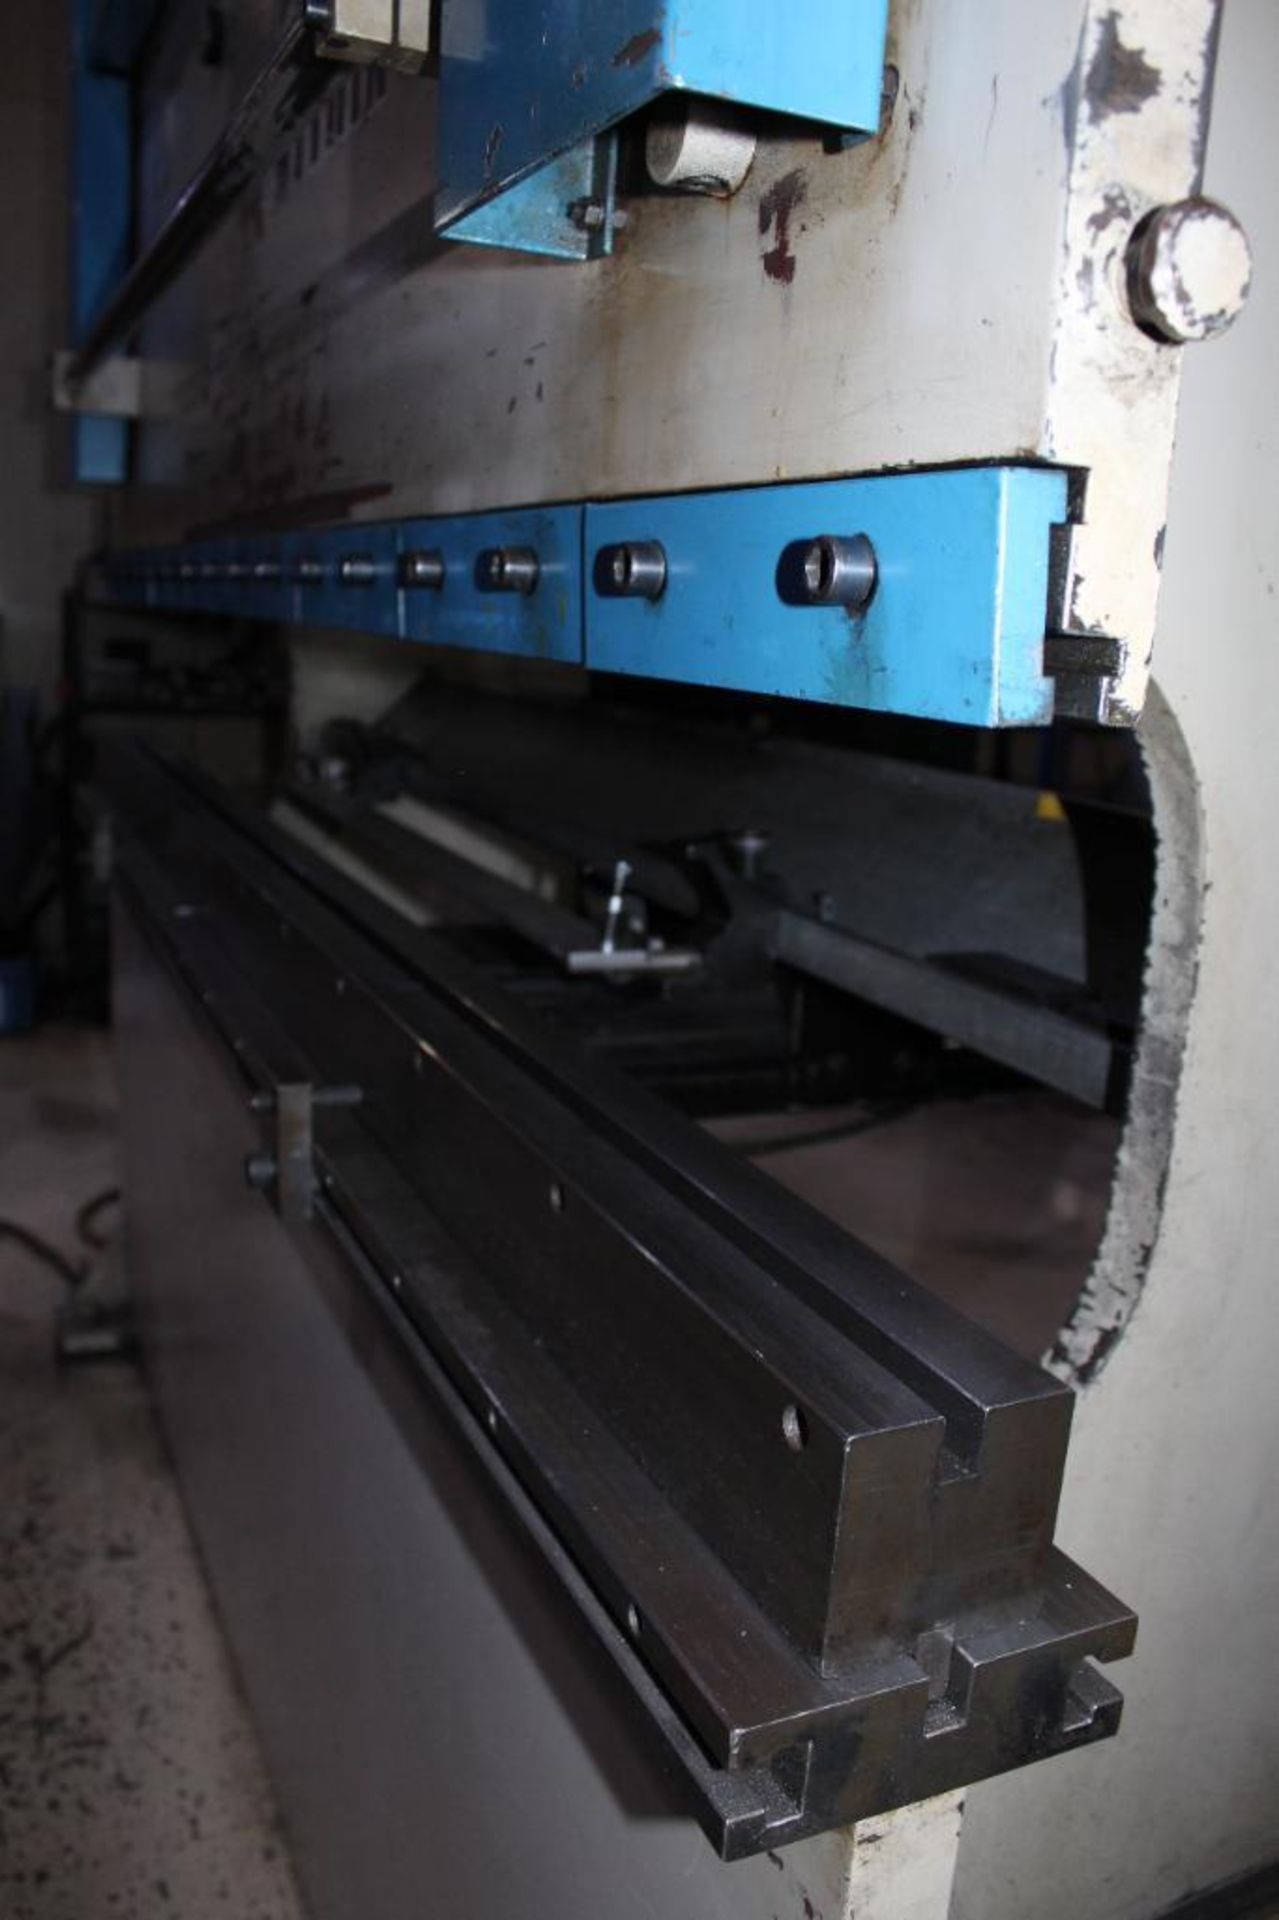 1993 LVD Hydraulic Press Brake Model 45JS06 With Hurco AutoBend 7 CNC Back Gage - Image 2 of 16